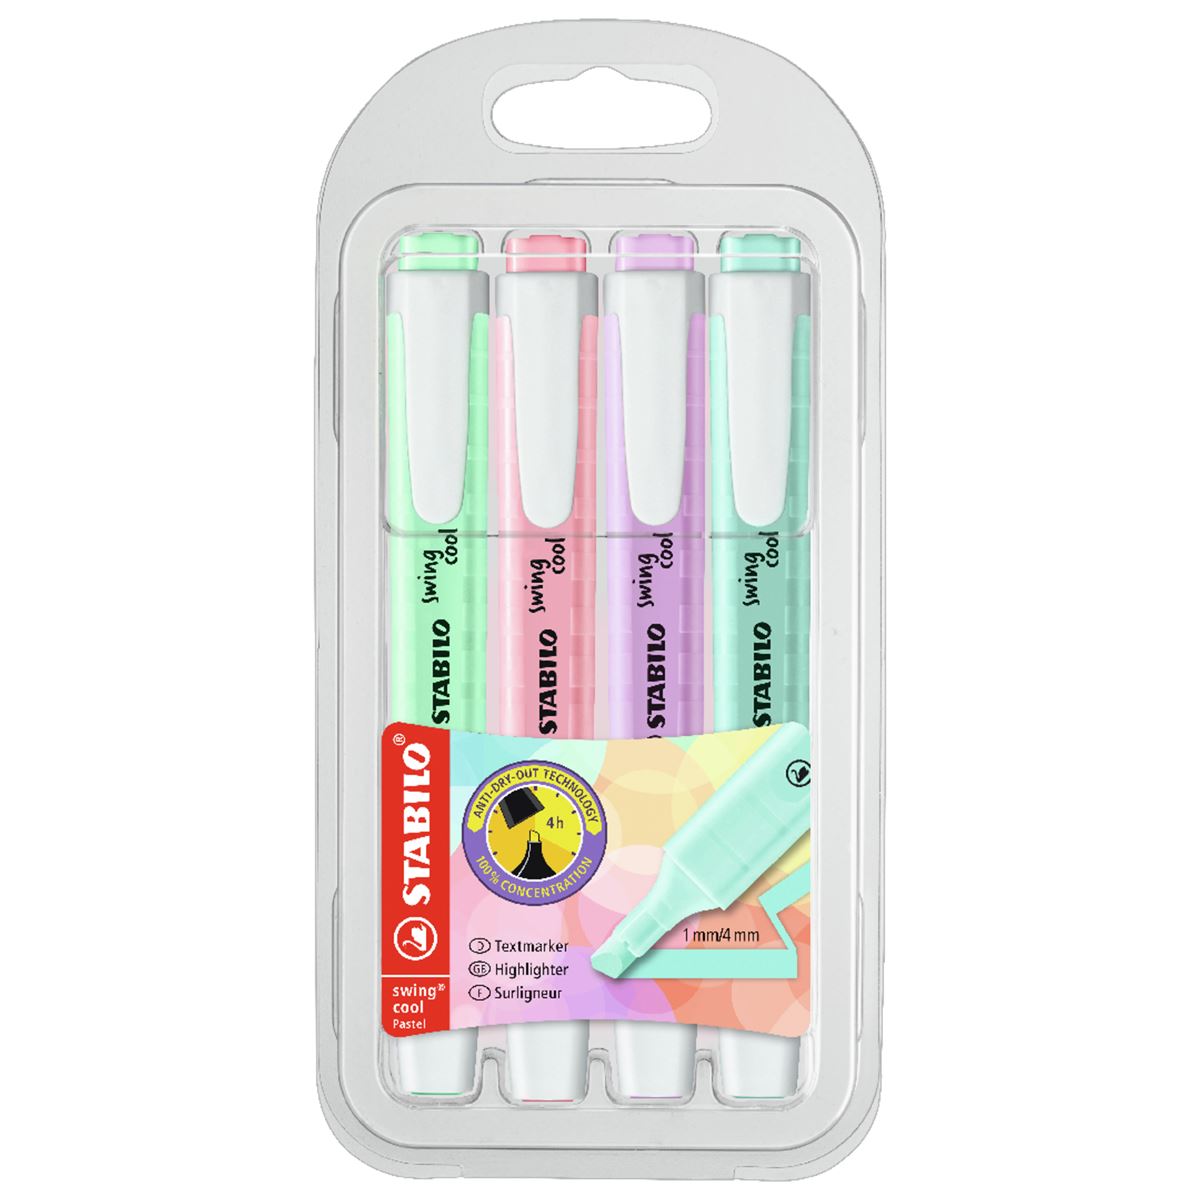 STABILO Swing Cool Highlighters - Set of 4 Pastel Pens